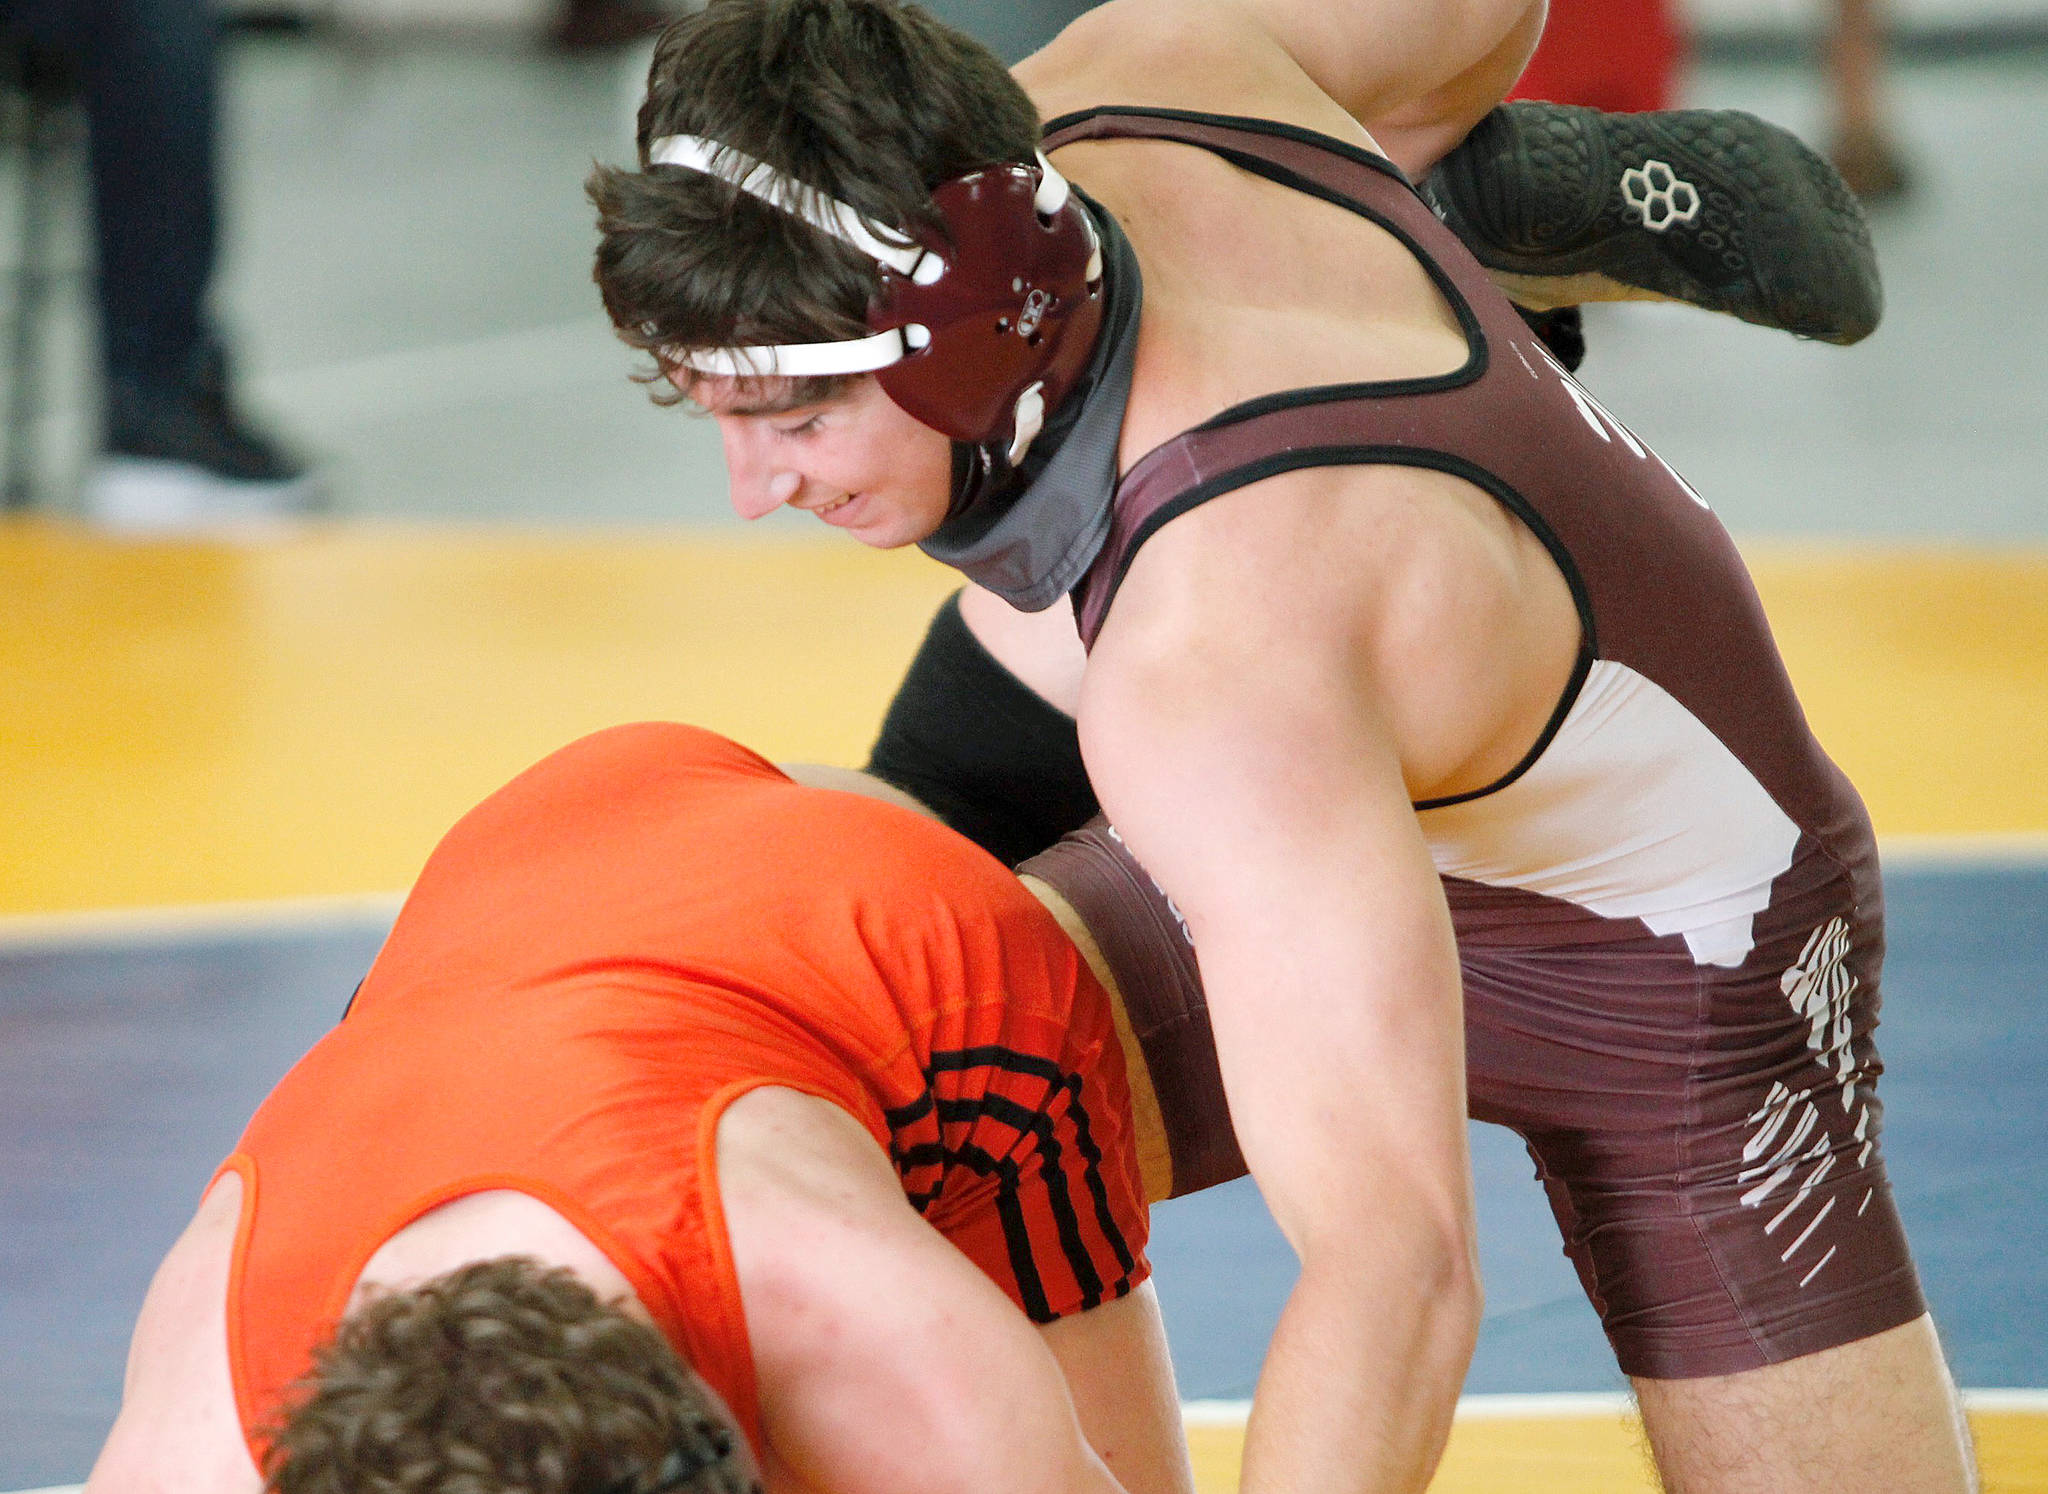 Mark Krulish | Kitsap News Group
Keel Slayback of South Kitsap placed fourth in the 152-pound weight category of the SPSL wrestling tournament.